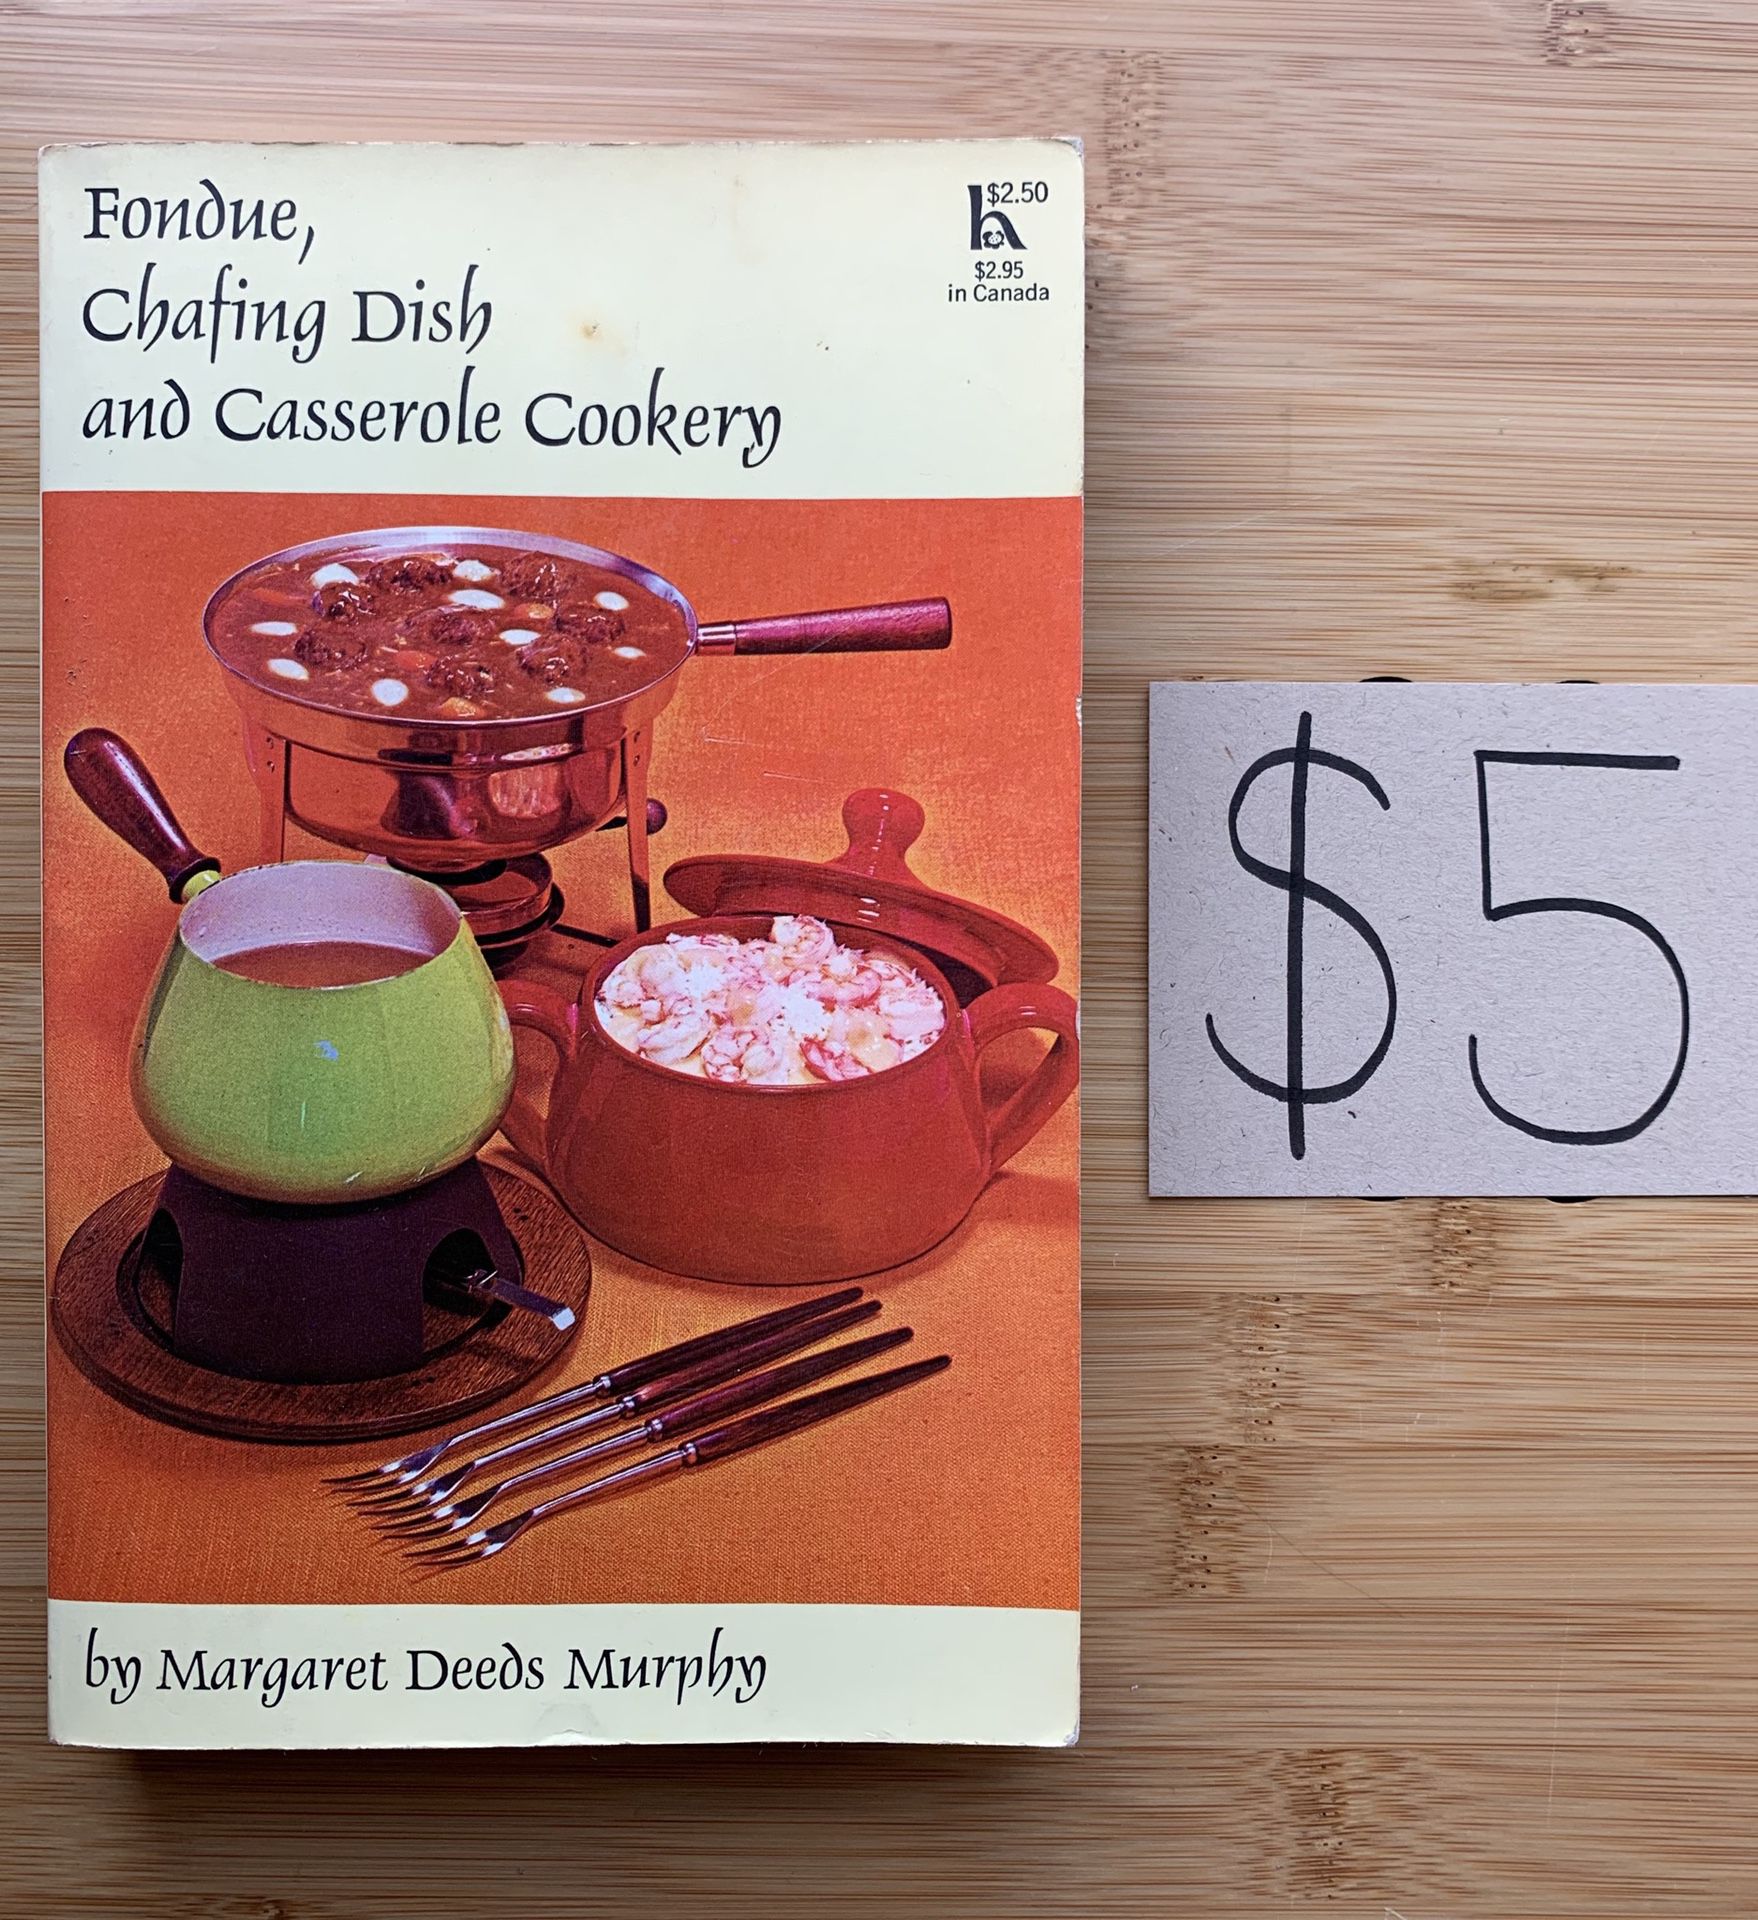 Fondue, Chafing Dish and Casserole Cookery by Margaret Deeds Murphy (vintage cookbook)